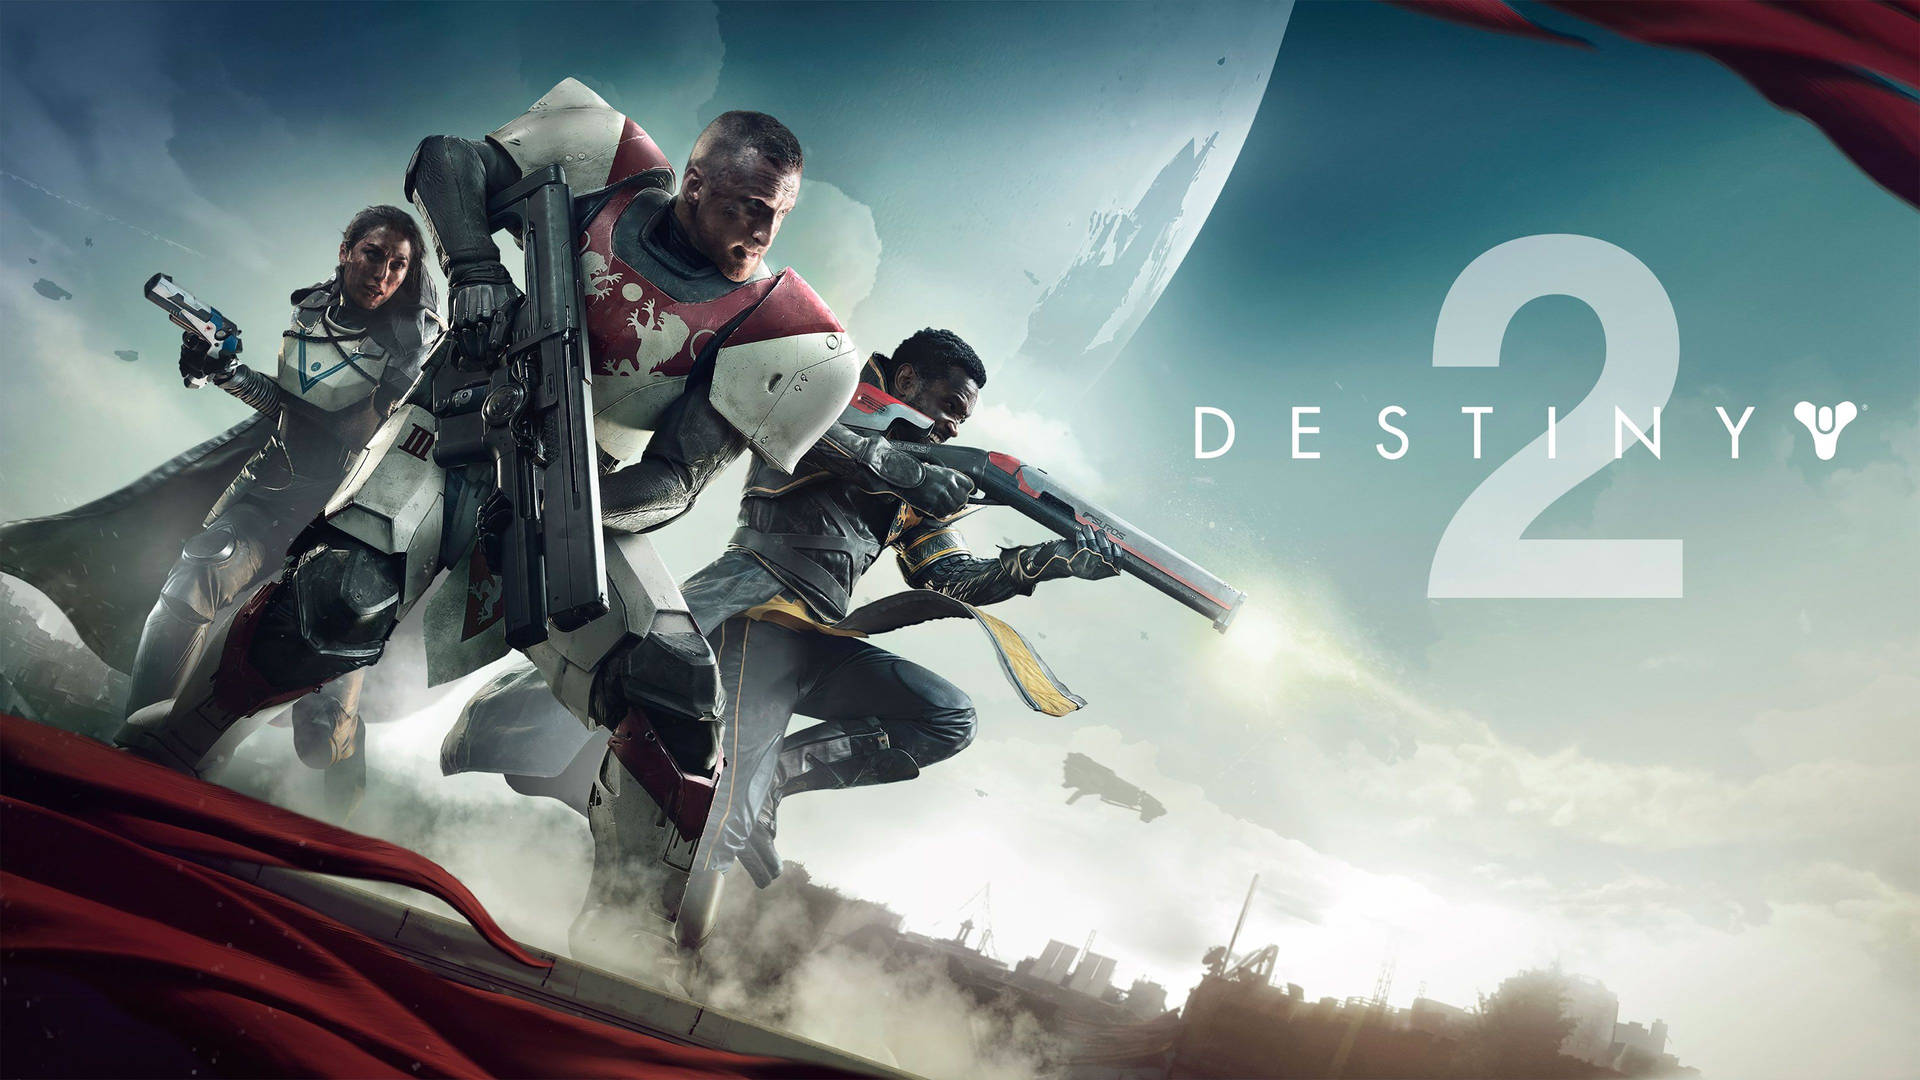 Destiny 2 3840X2160 Wallpaper and Background Image